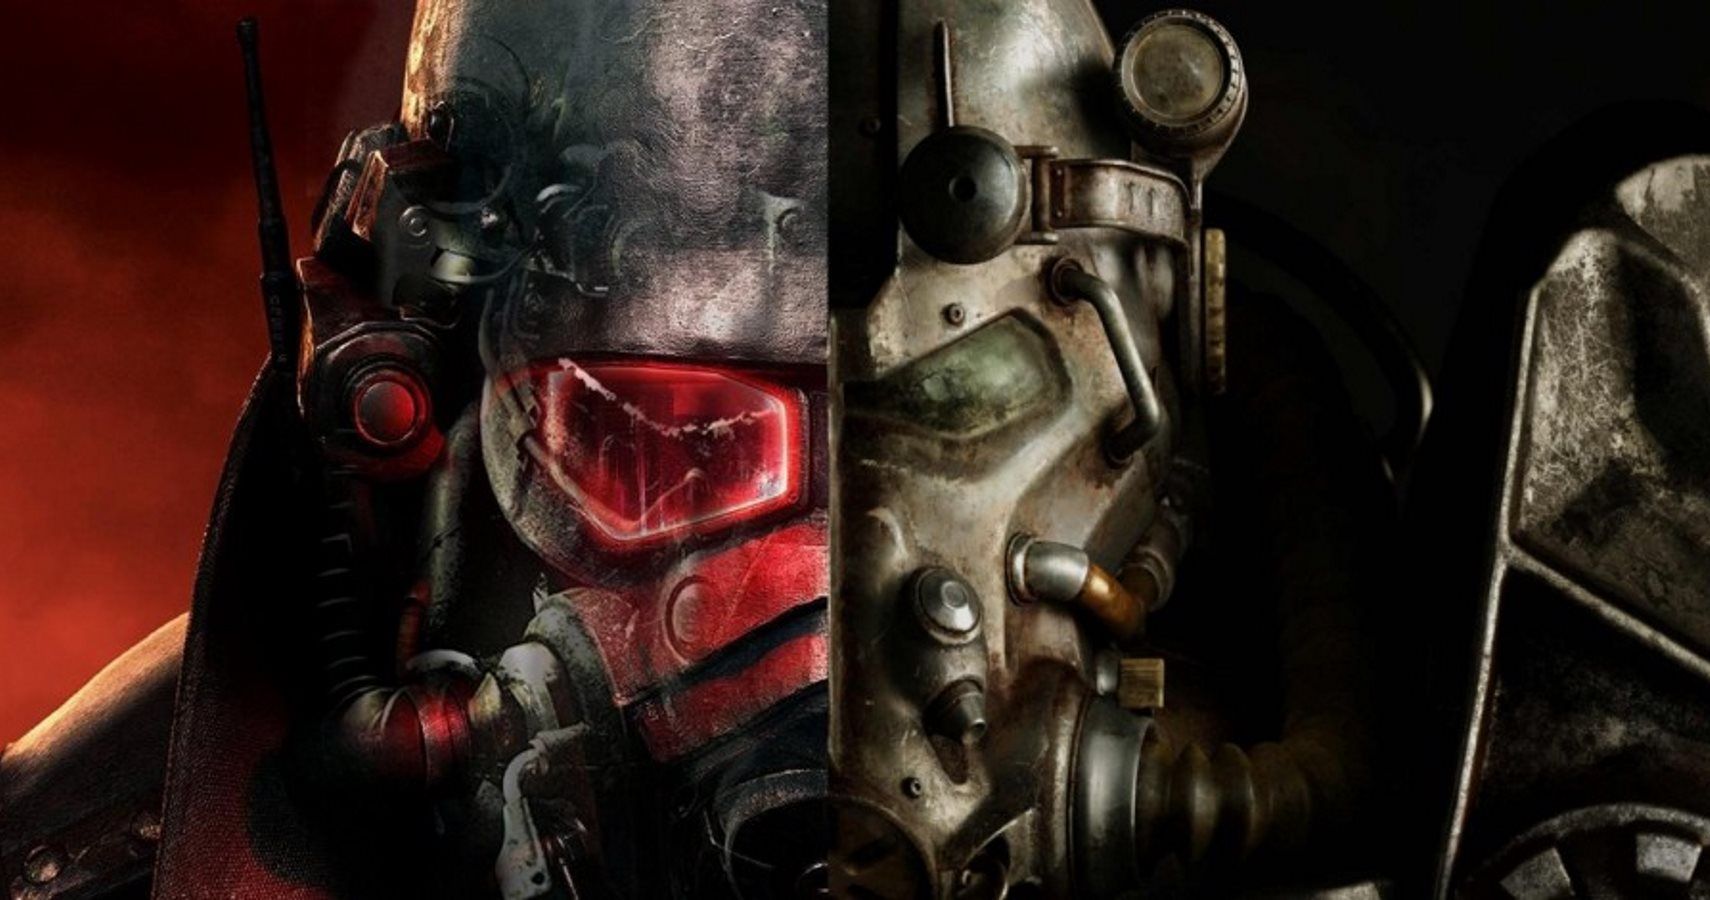 Fallout 3 And New Vegas Received Massive, Mystery Patches - Could A Remaster Be Close Behind